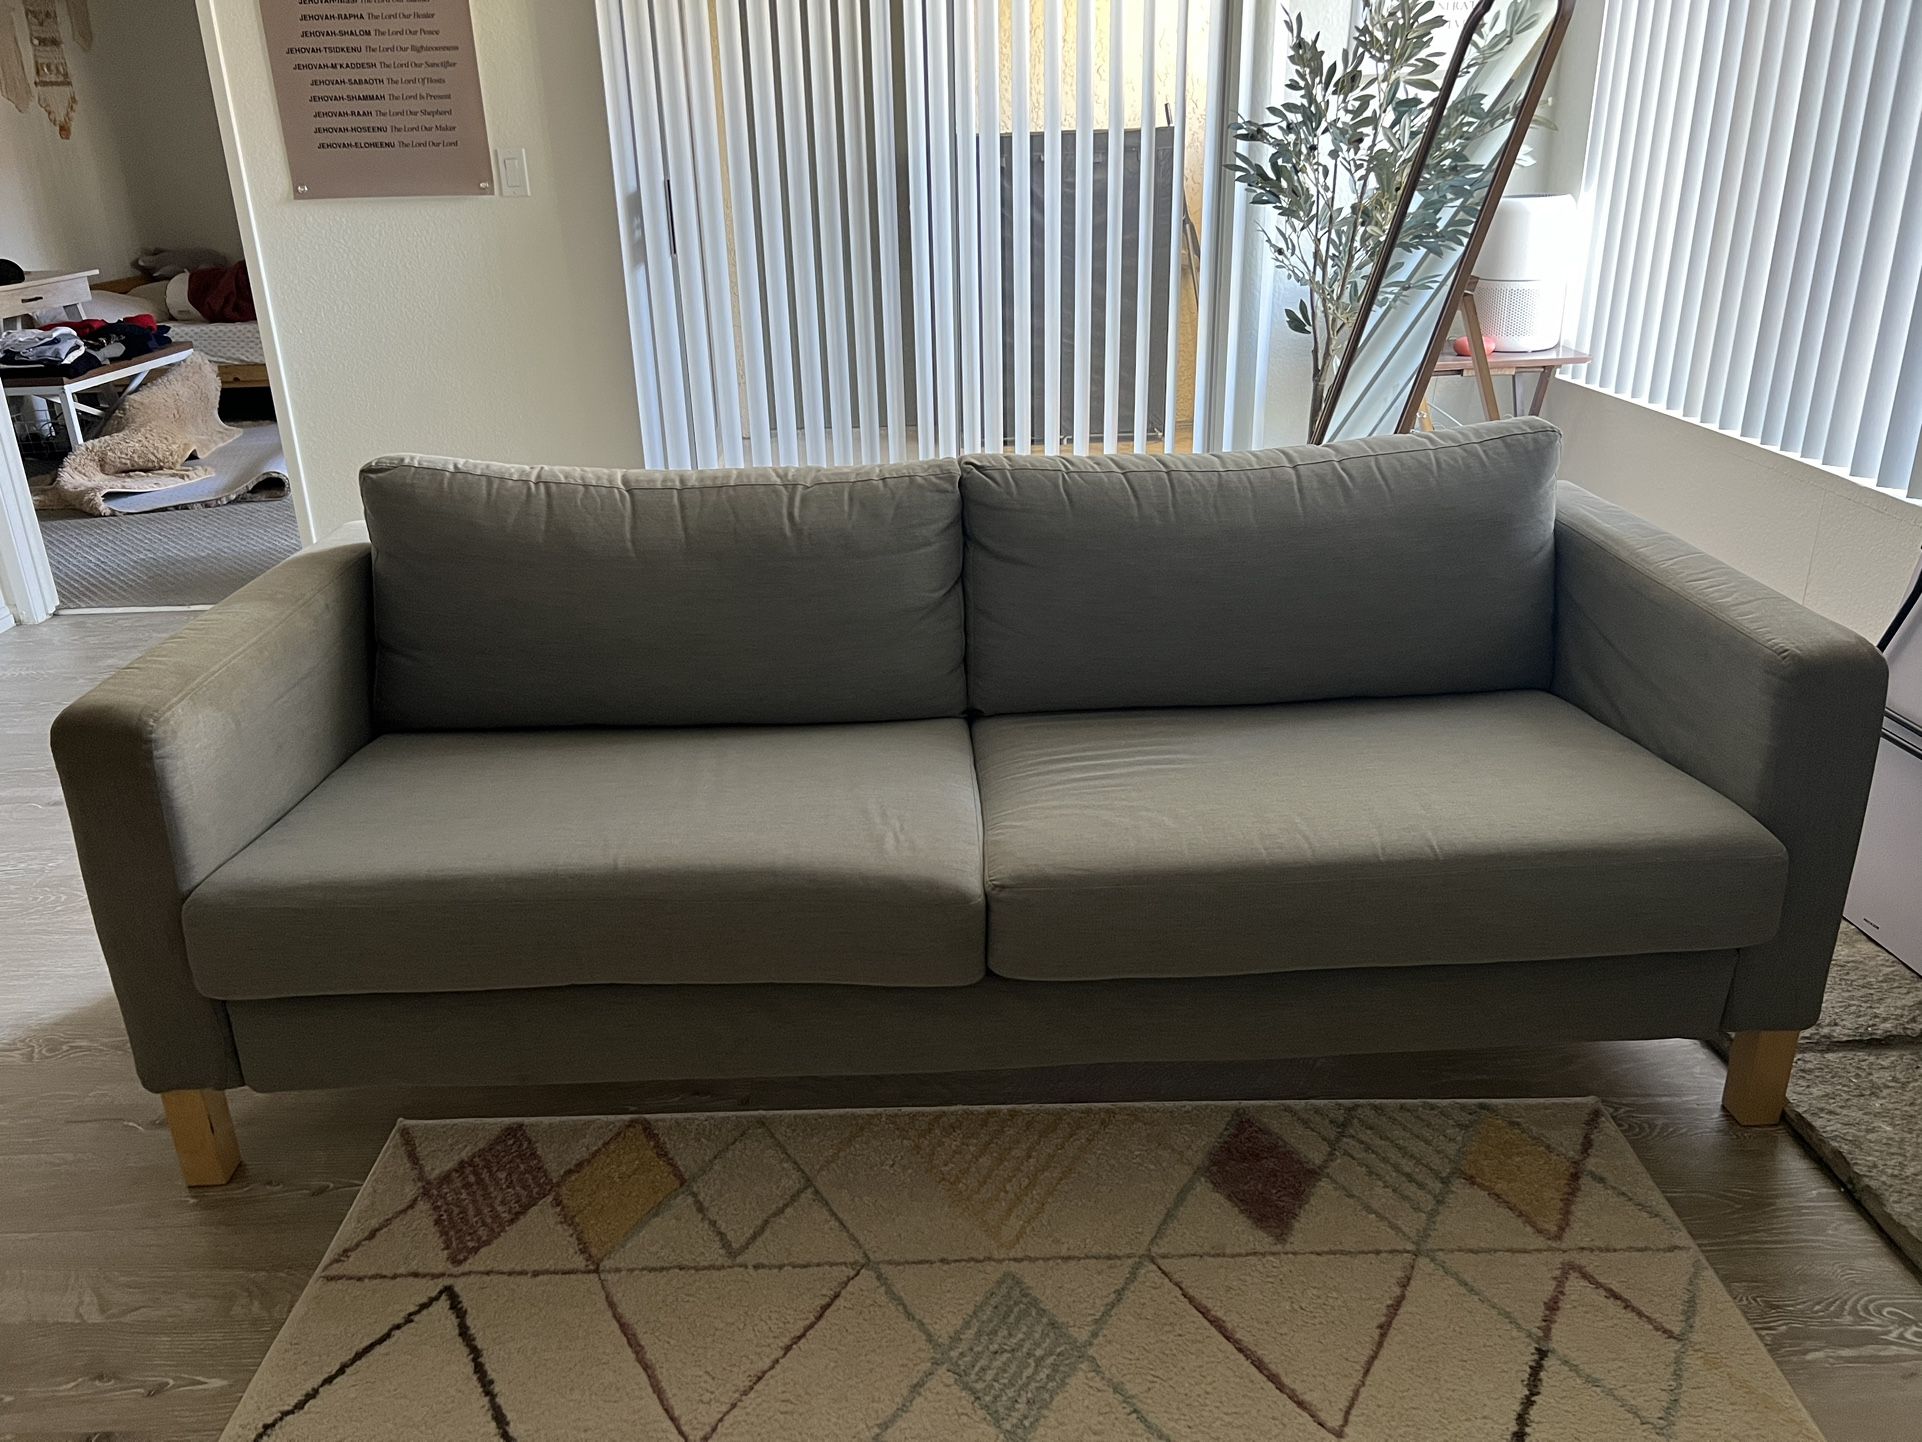 IKEA Couch (free Couch Cover)